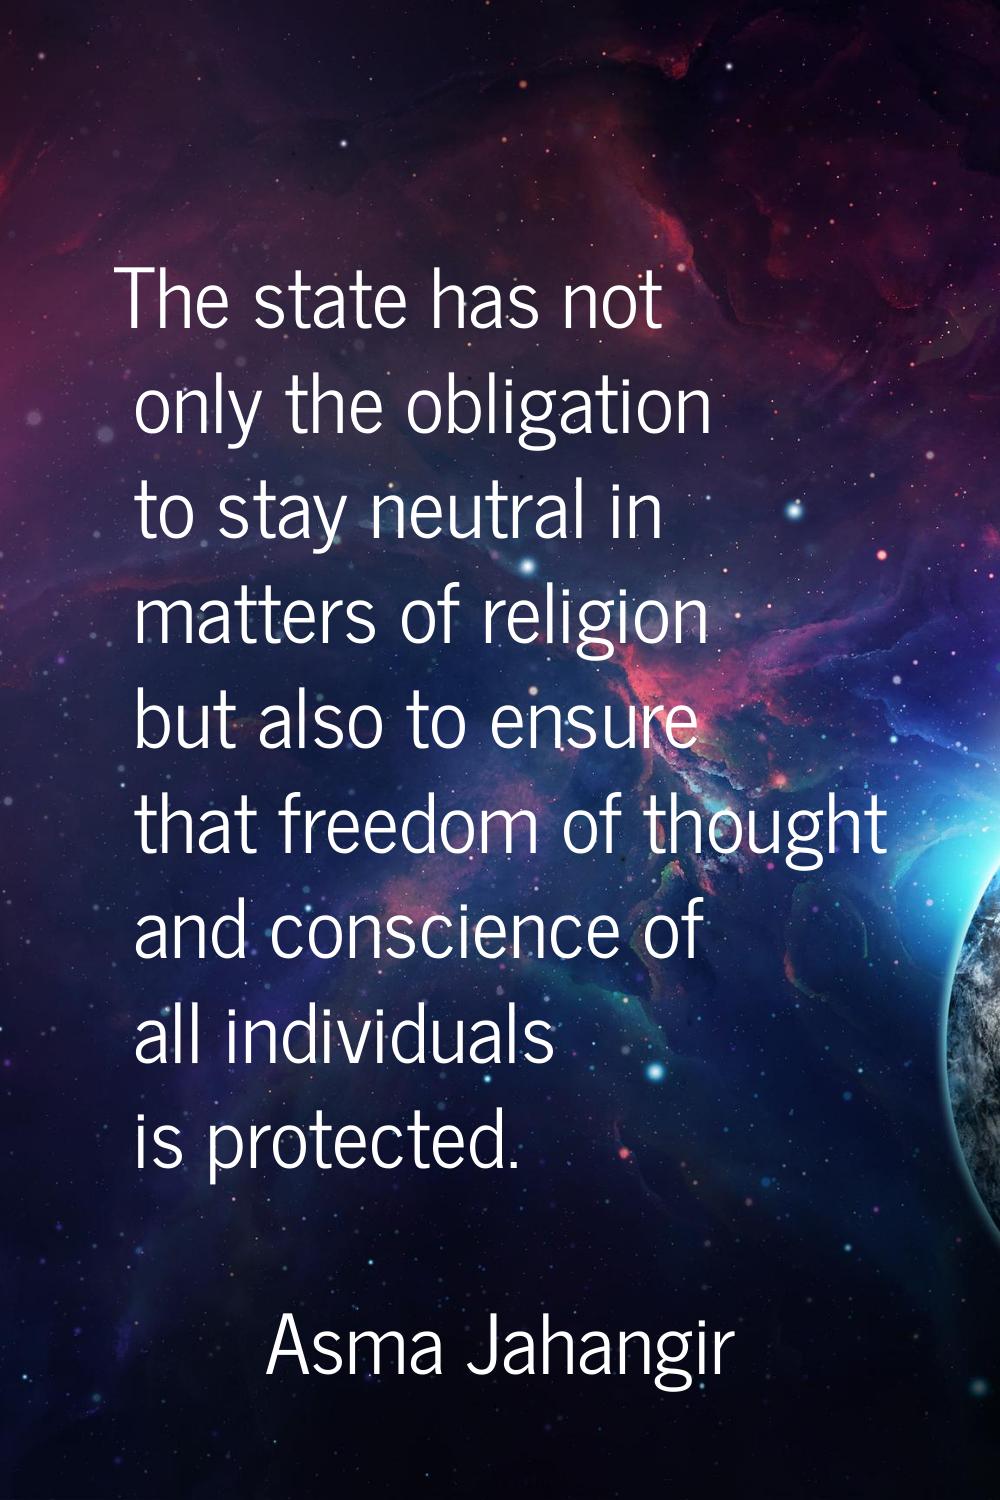 The state has not only the obligation to stay neutral in matters of religion but also to ensure tha